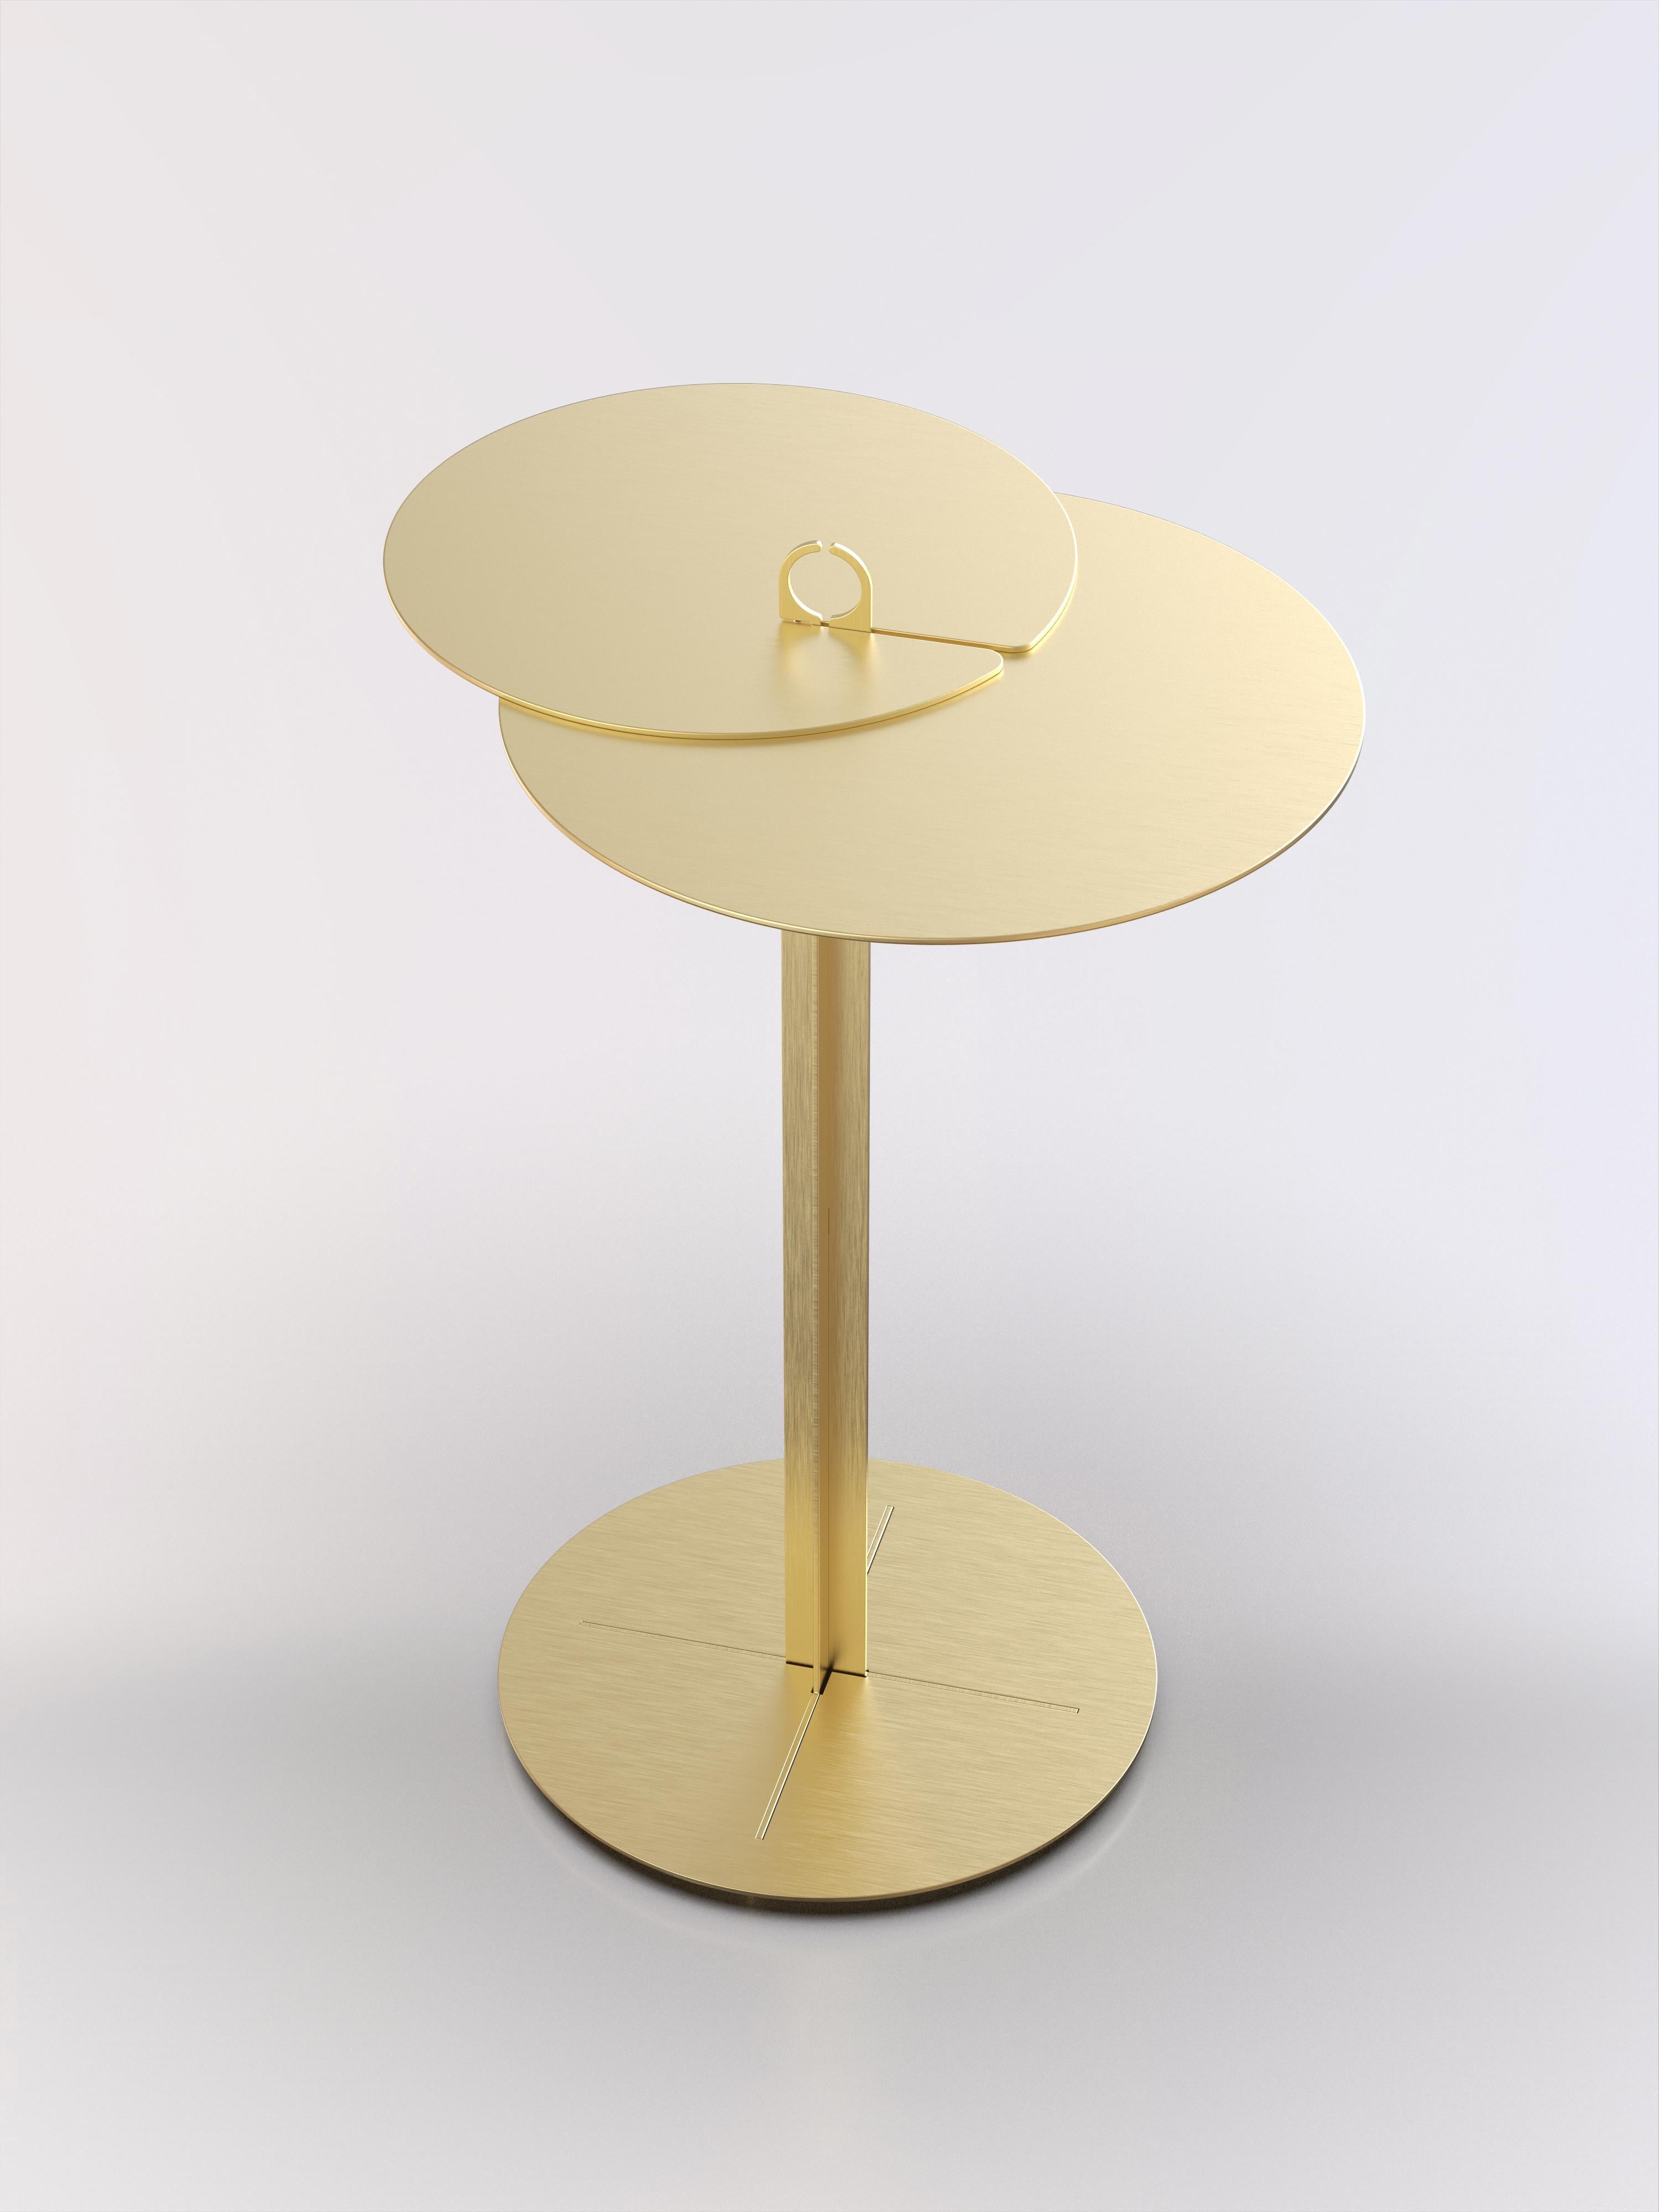 Side table made in lasercut metalsheet with an interlock brushed brass structure.